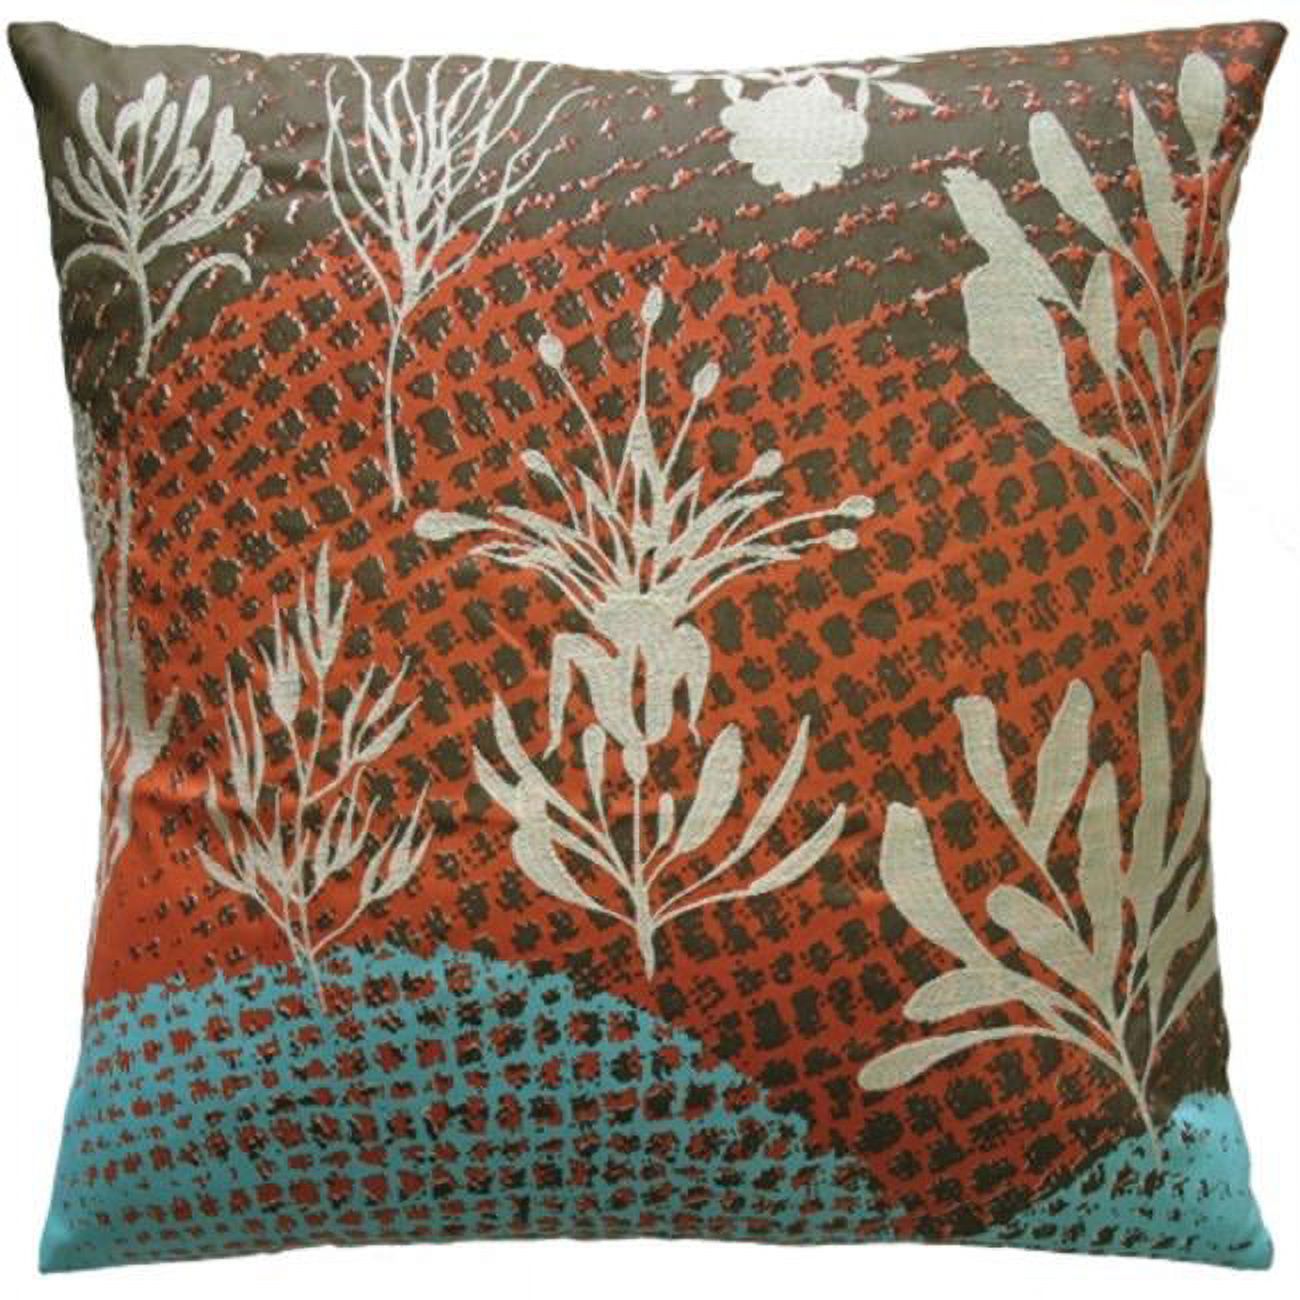 Koko Company 91763 Ecco- Pillow- 20X20- Cotton- Print And Embroidery- Off White Leaves. - image 1 of 1